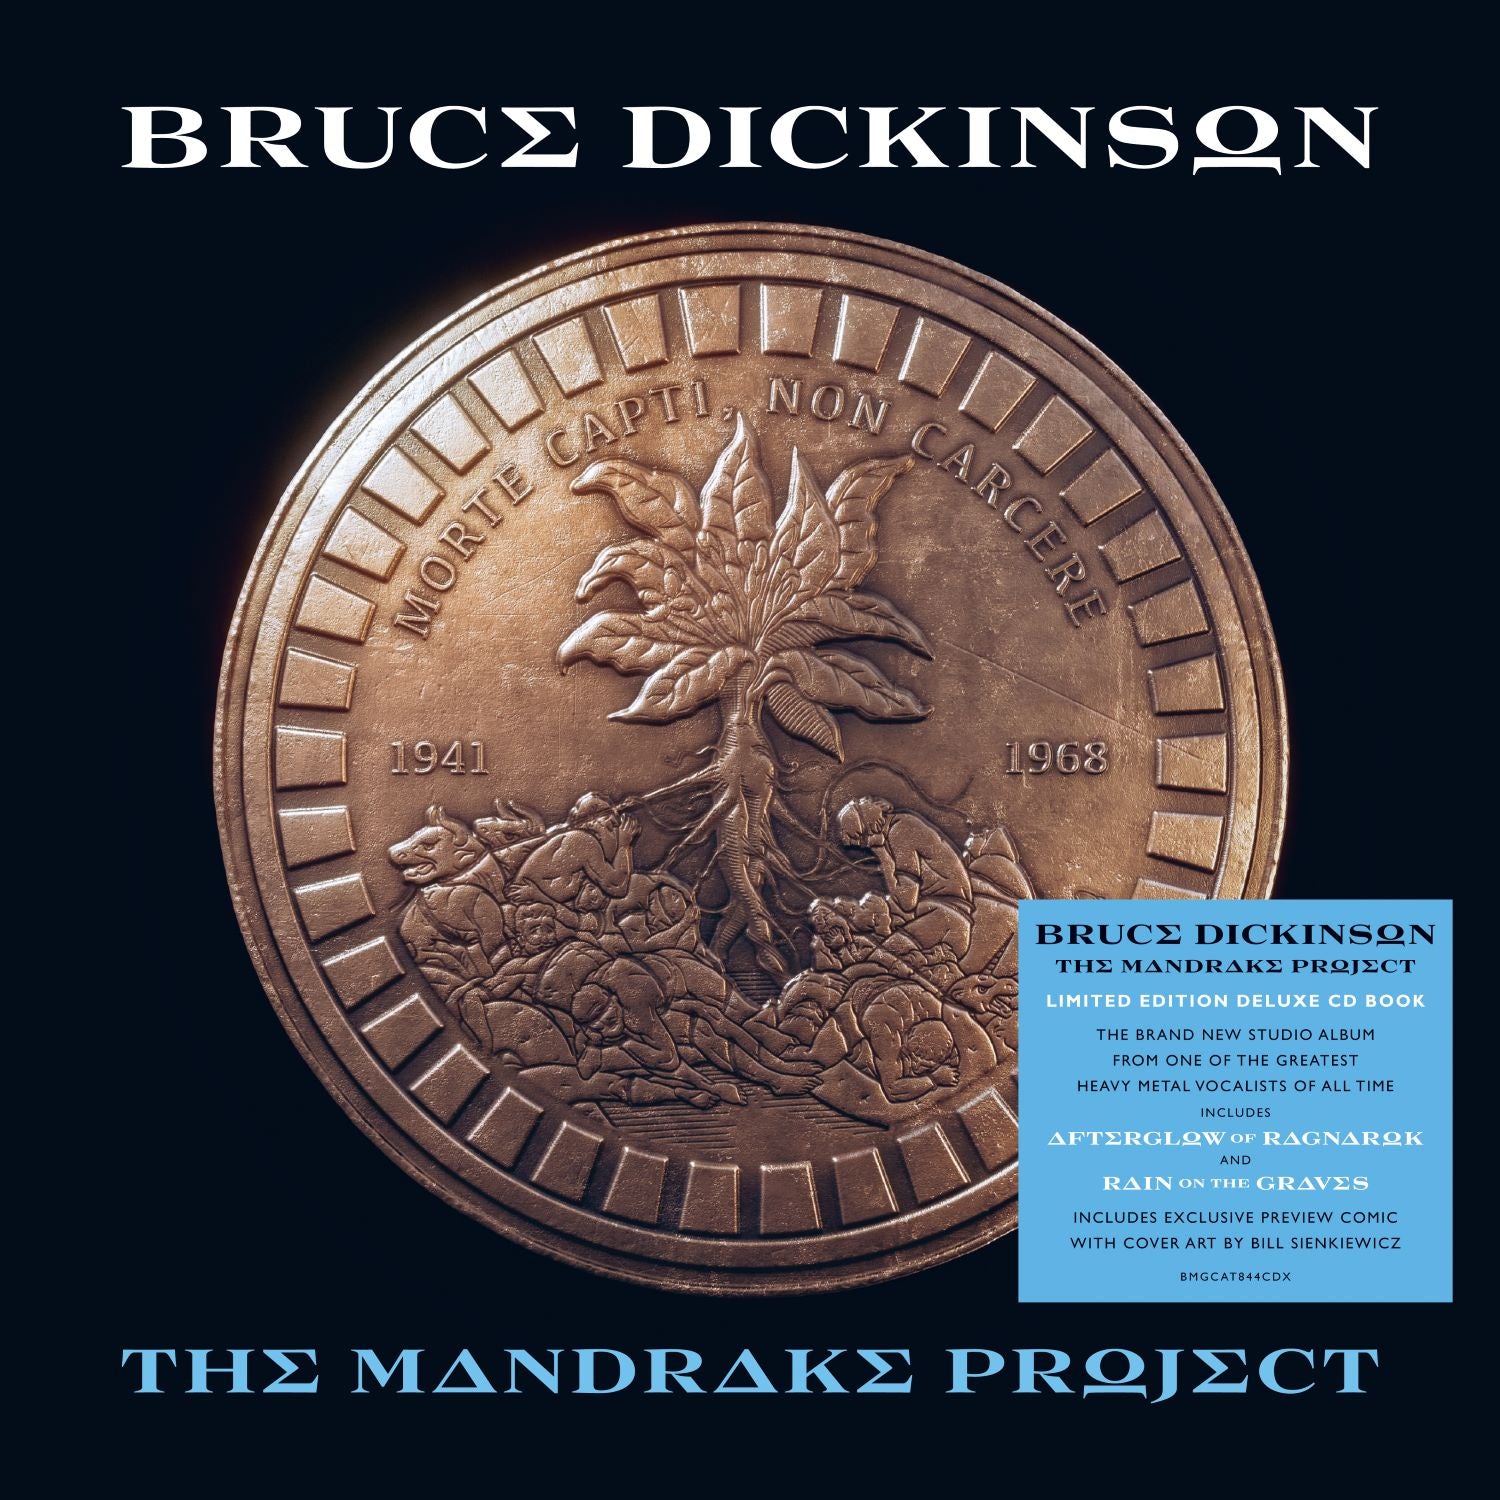 Bruce Dickinson - The Mandrake Project: Deluxe CD (in 7” Casebound Book w/ Slipcase)